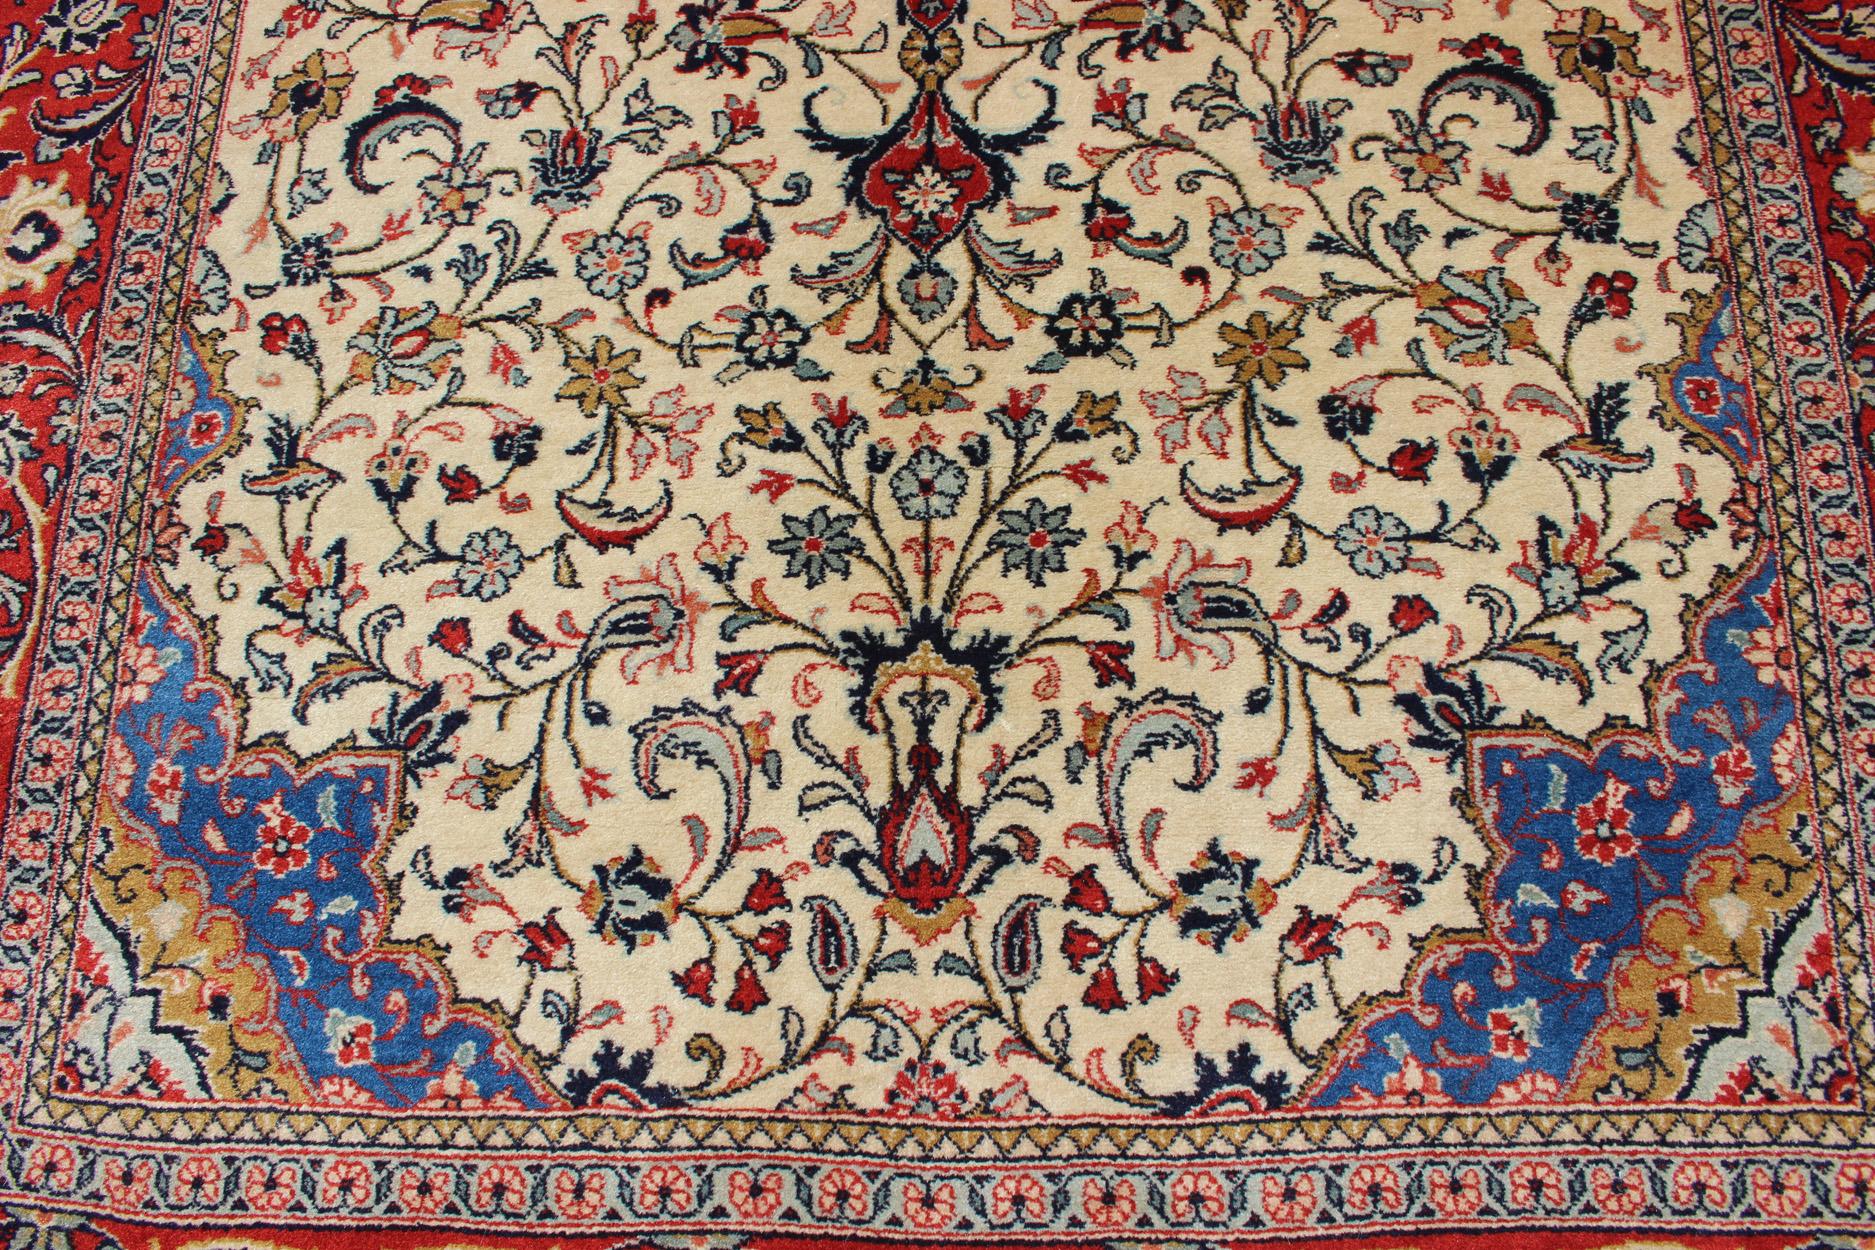 Vintage Persian Tabriz Rug with Floral Design in Cream, blue and Red 2